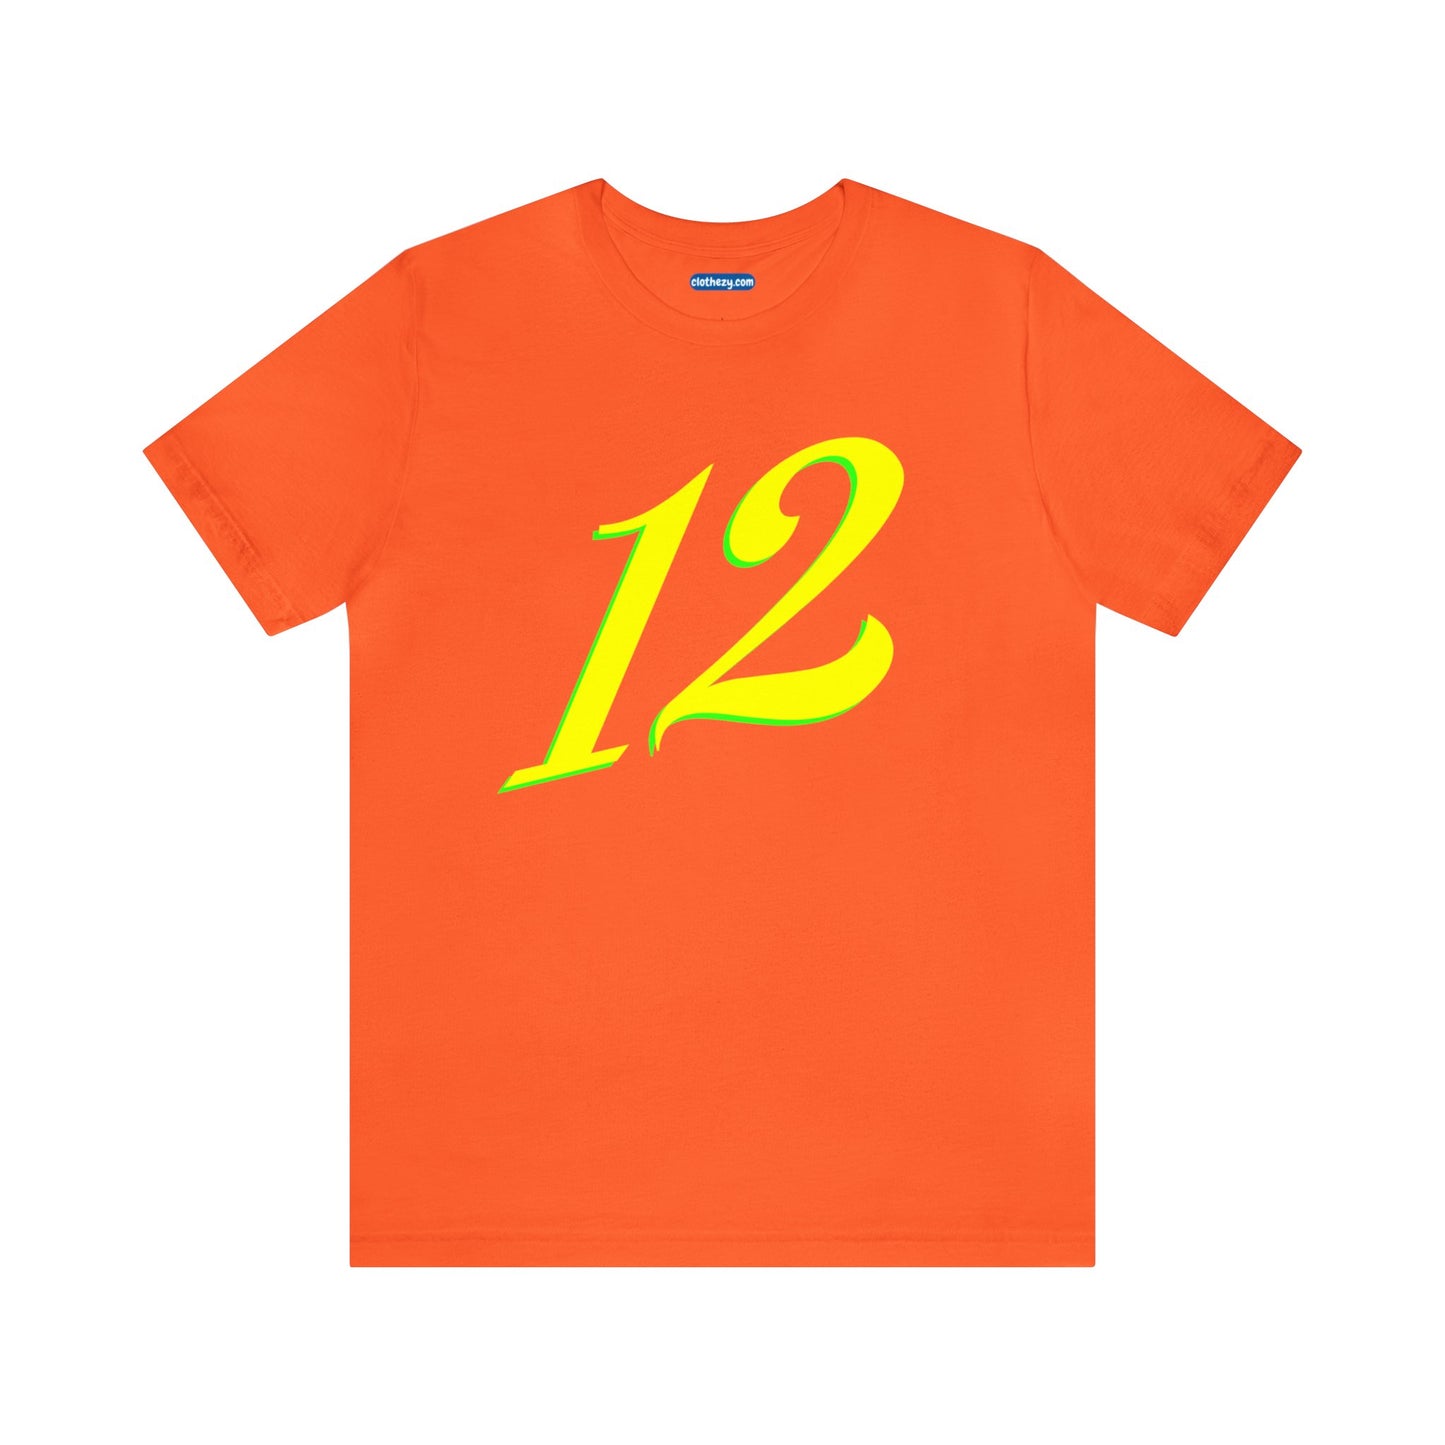 Number 12 Design - Soft Cotton Tee for birthdays and celebrations, Gift for friends and family, Multiple Options by clothezy.com in Pink Size Small - Buy Now